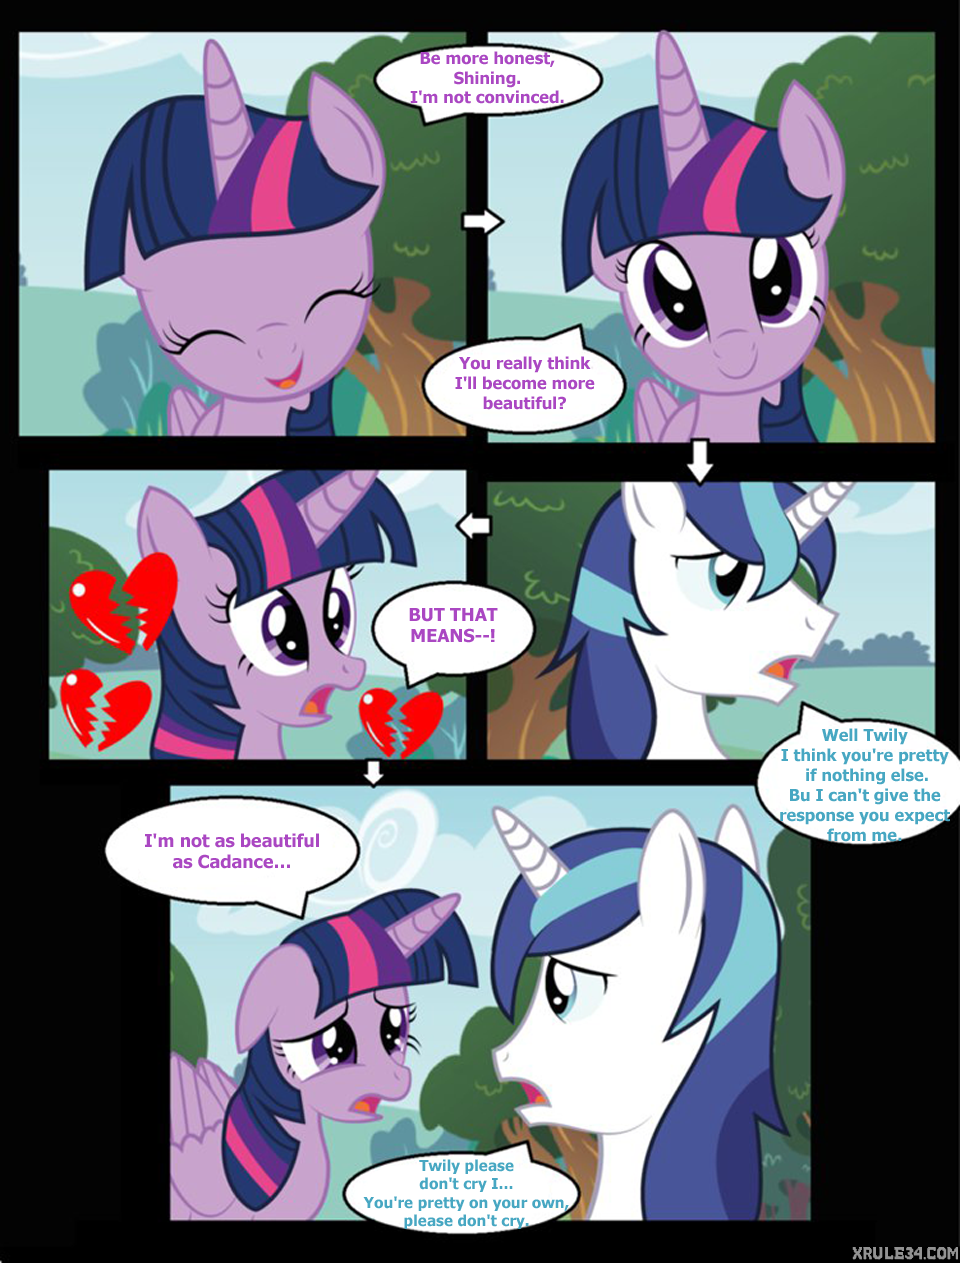 Your Best Friend and Best Lover mlp porn comics Oral sex, Pregnant